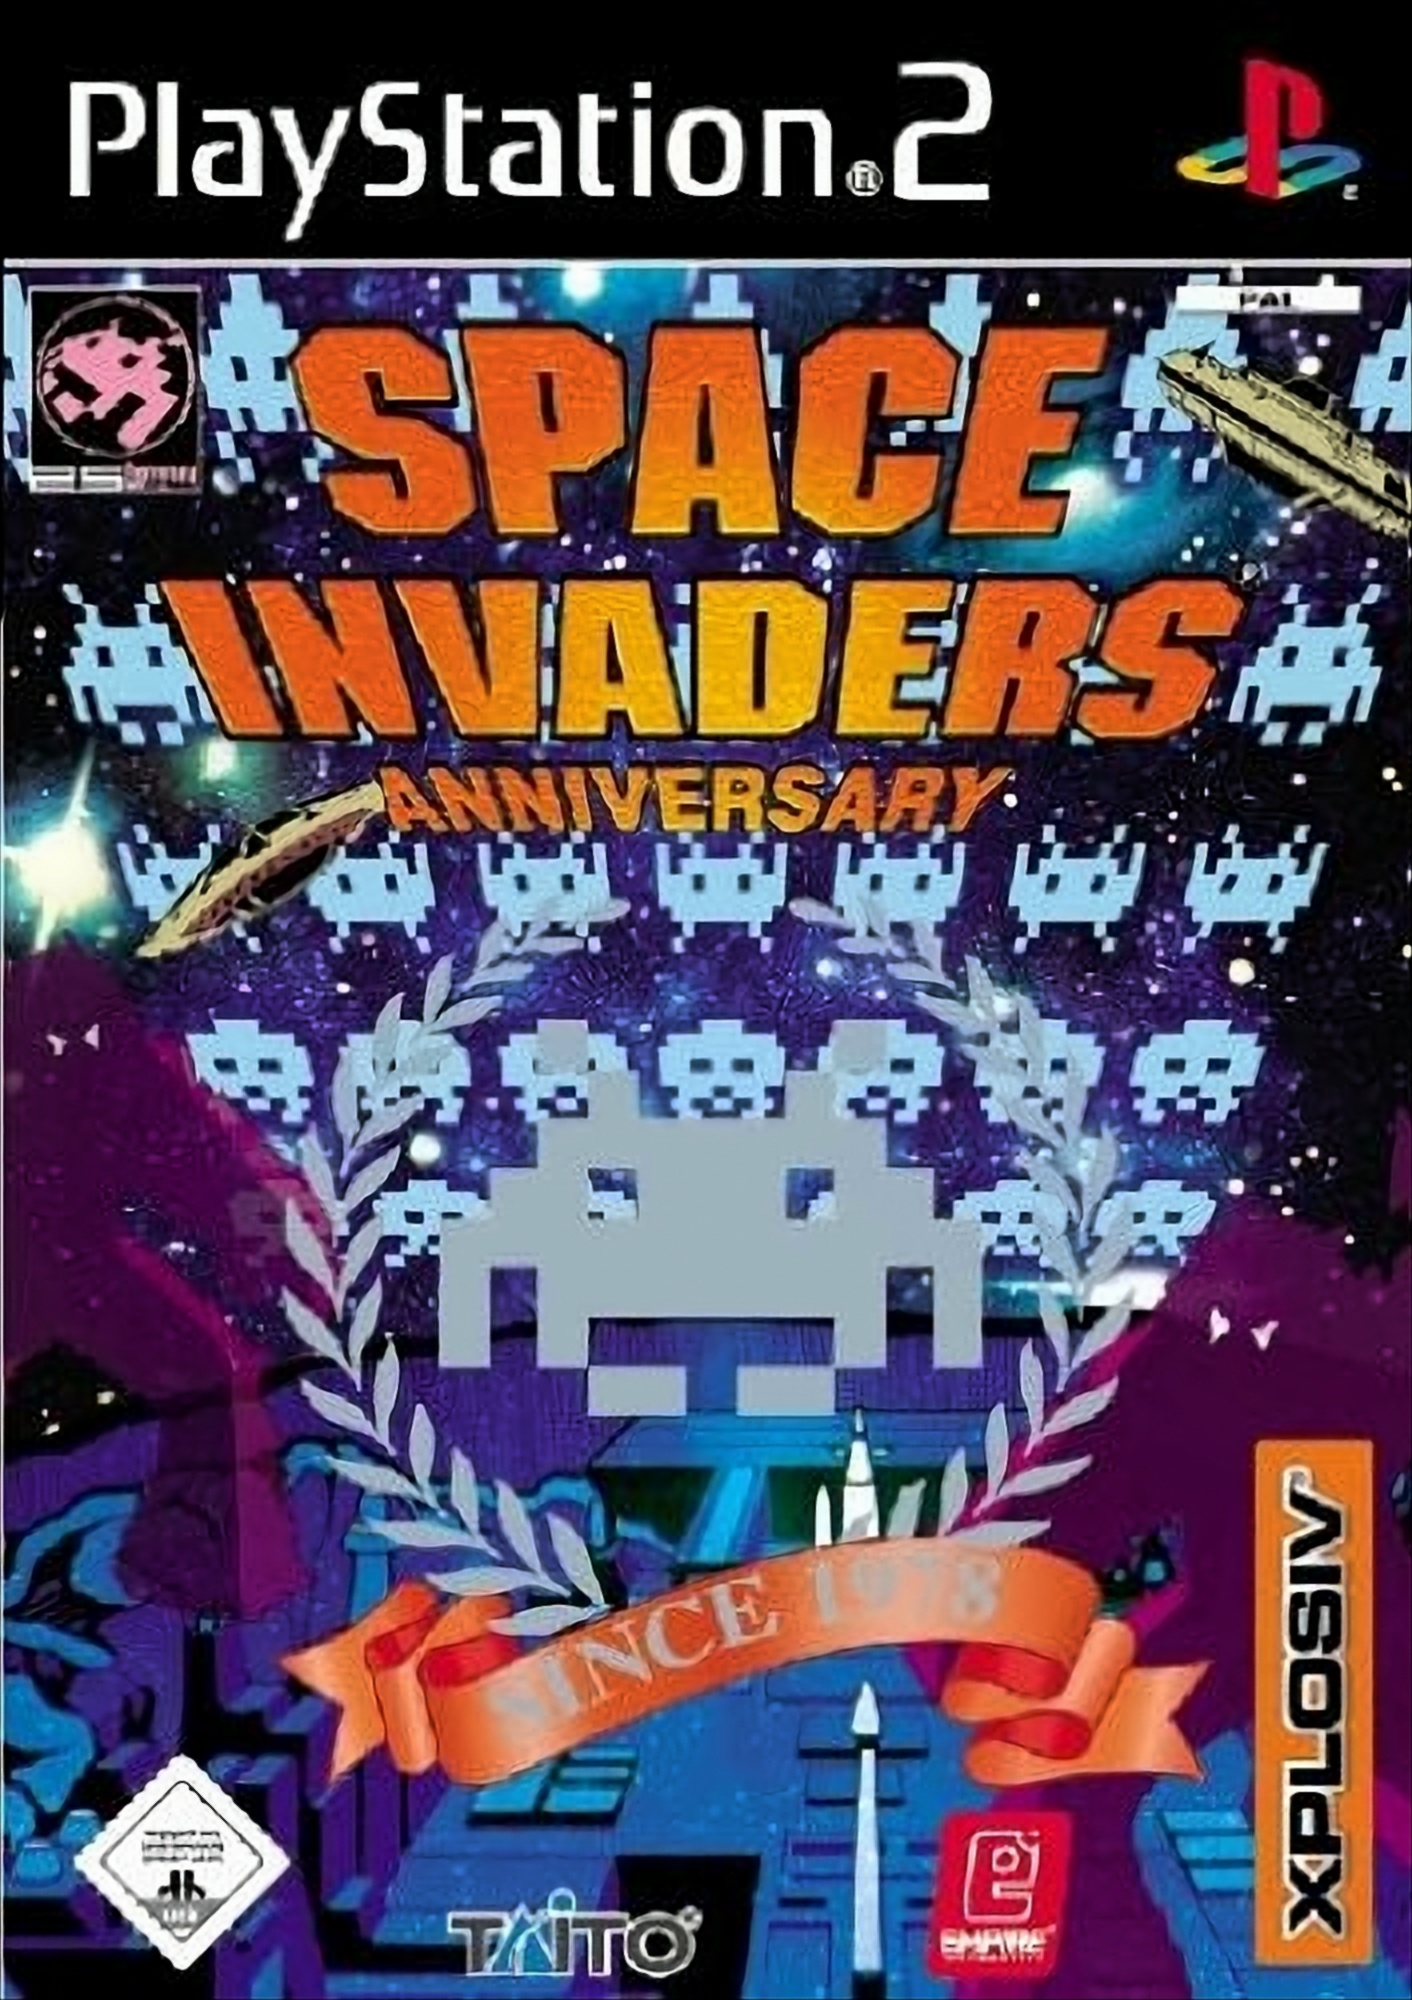 - Space 2] [PlayStation Invaders Anniversary